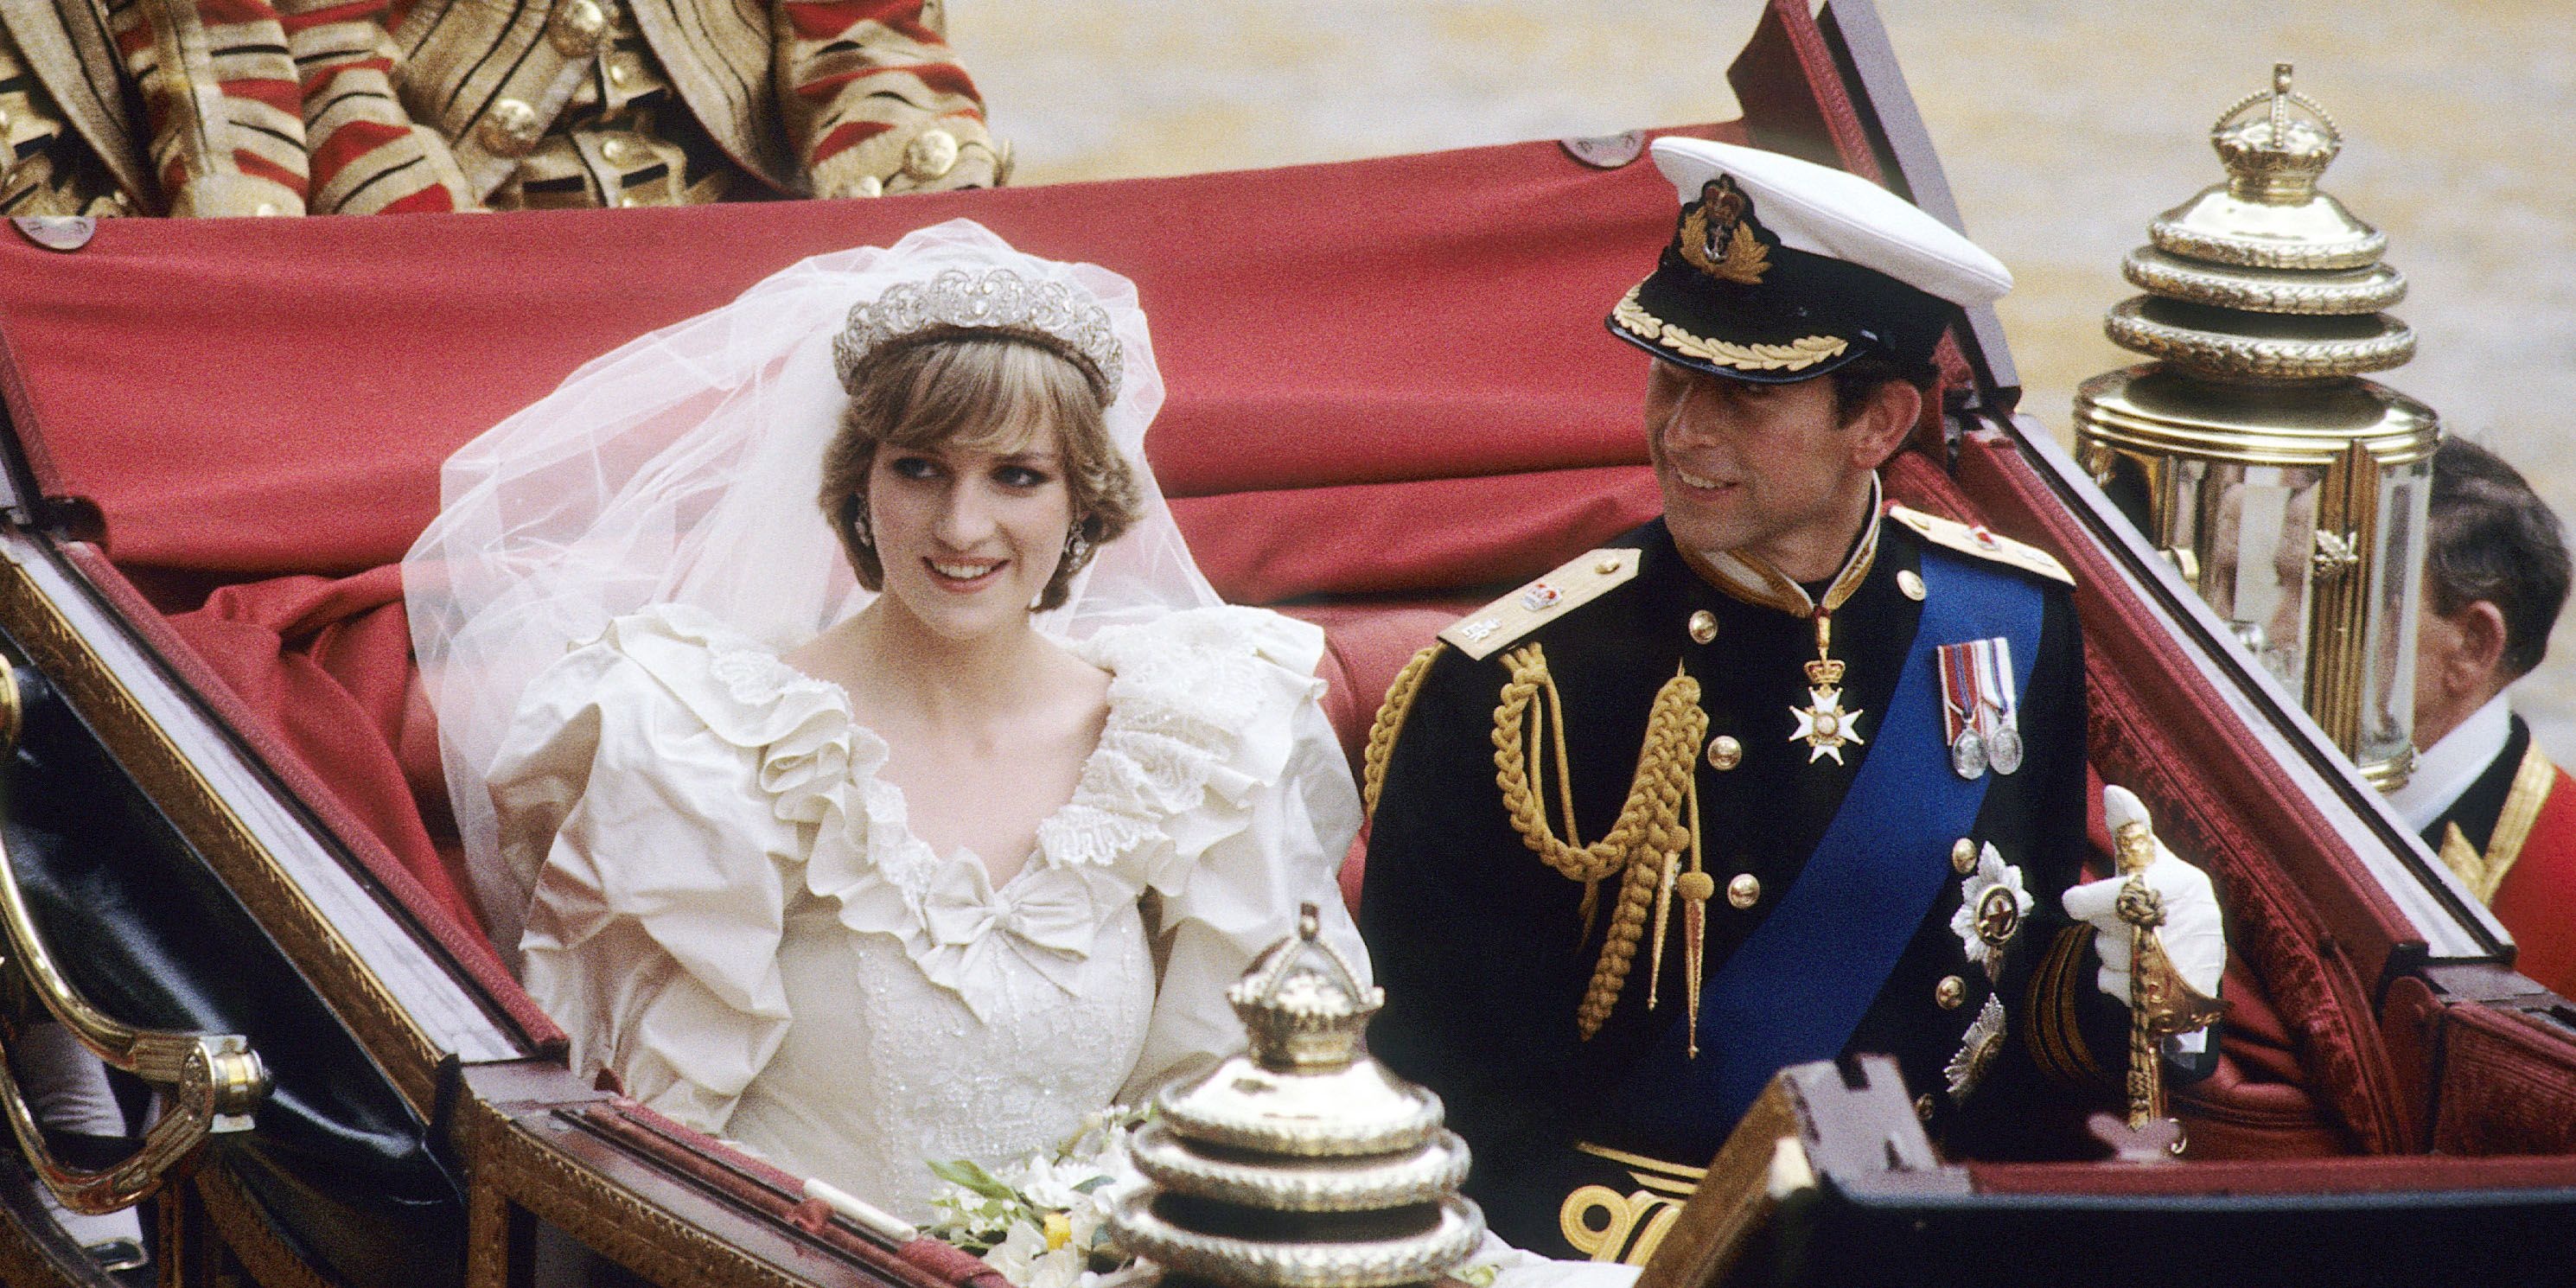 Princess Diana: Prince of Wales, the eldest son of Queen Elizabeth II, The wedding took place at St Paul's Cathedral in 1981. 2980x1490 Dual Screen Background.